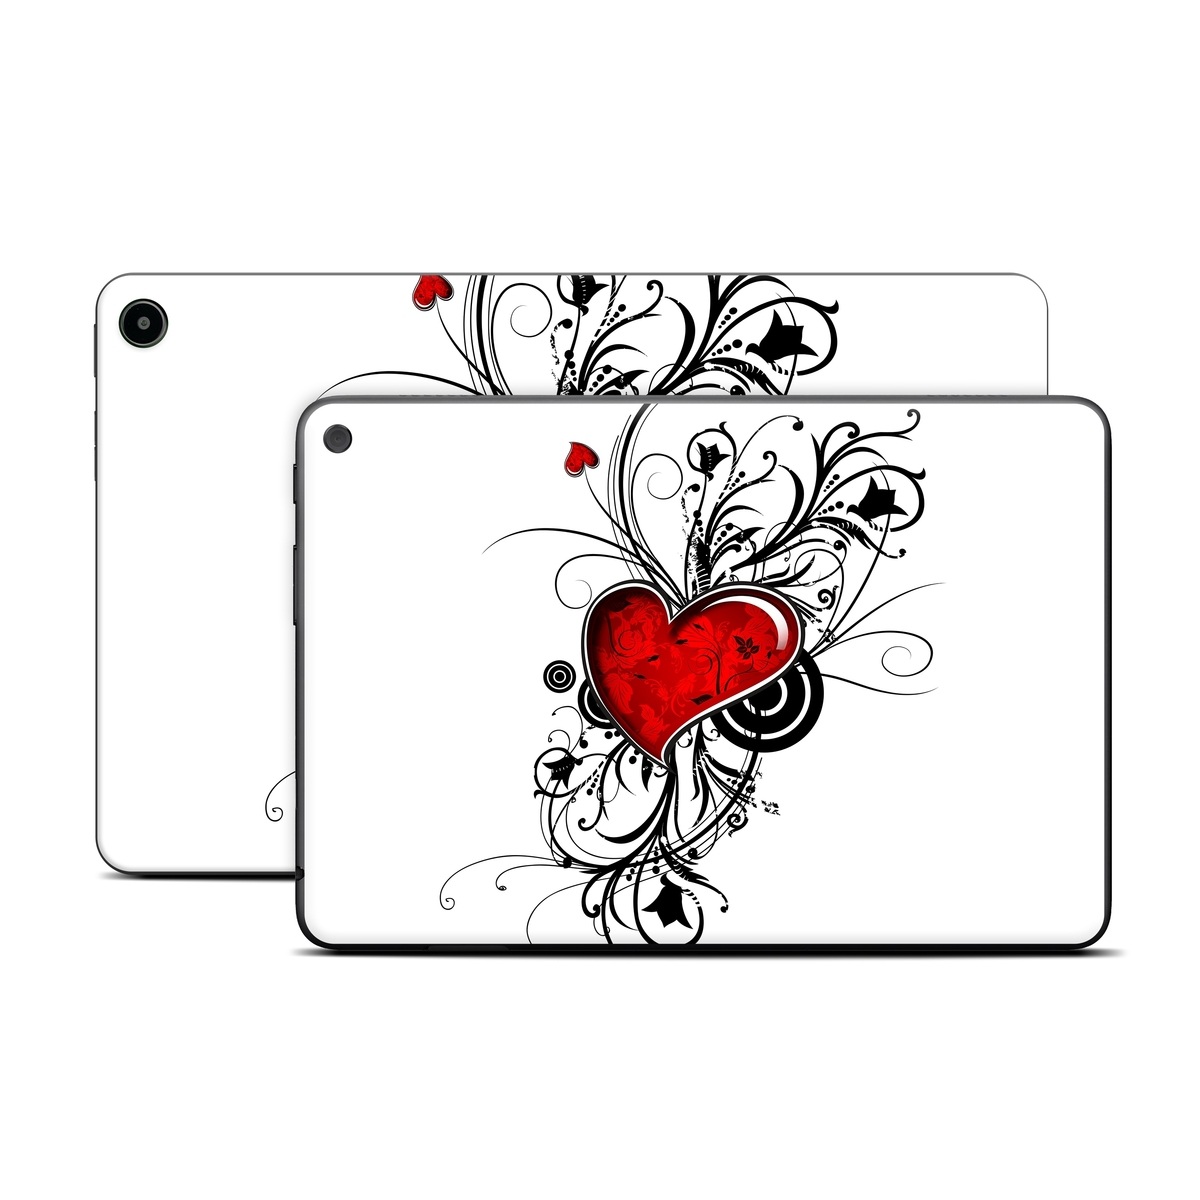 Amazon Fire Tablet Series Skin Skin design of Heart, Line art, Love, Clip art, Plant, Graphic design, Illustration, with white, gray, black, red colors